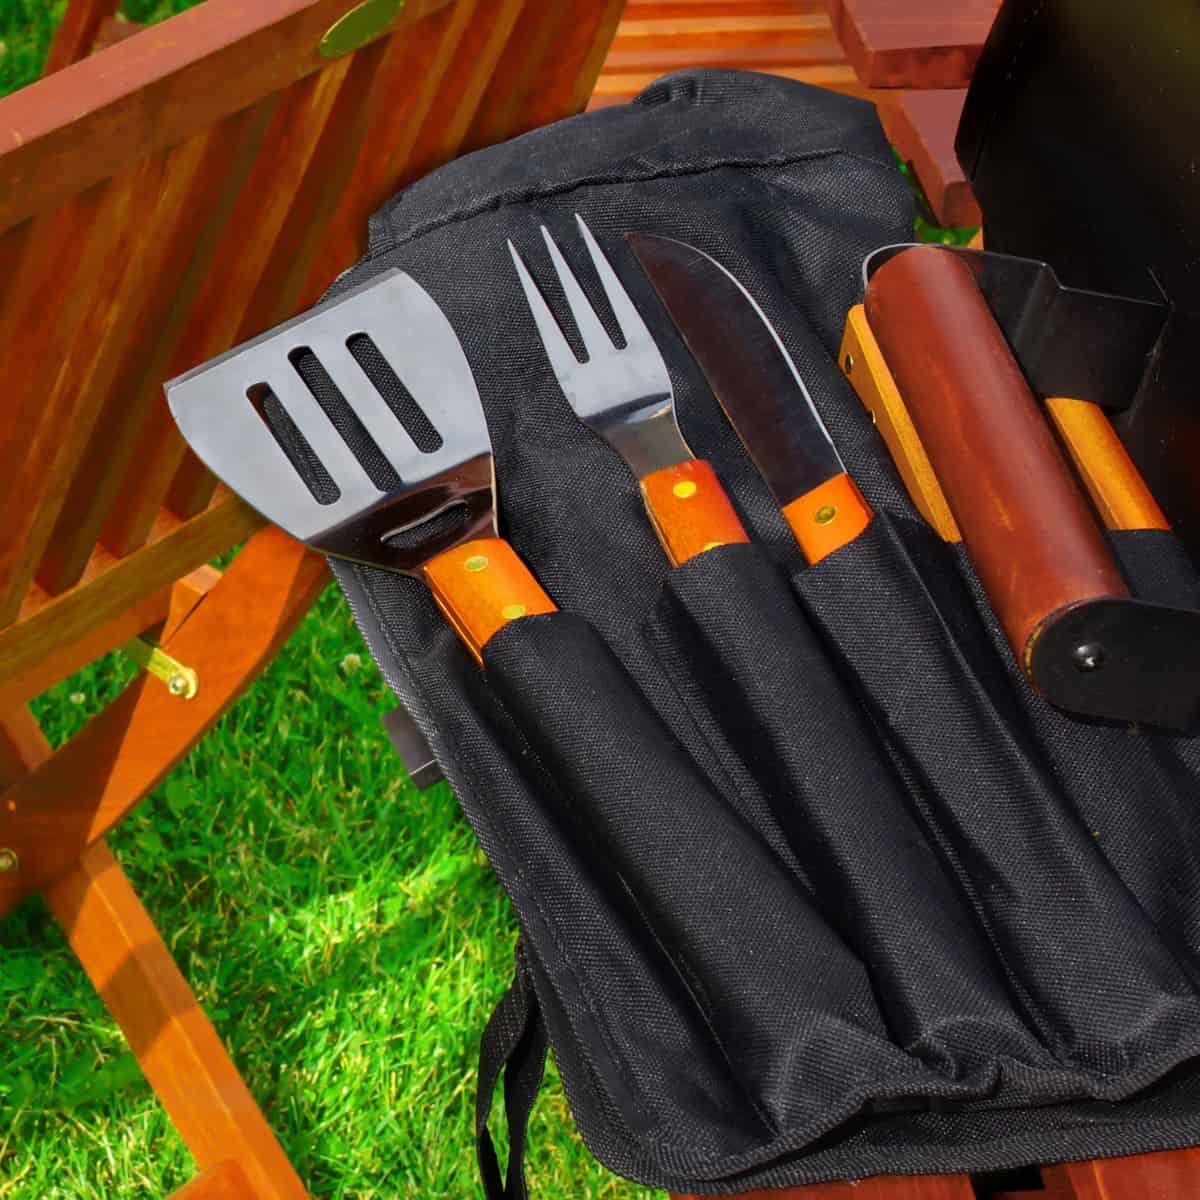 What are bbq tools